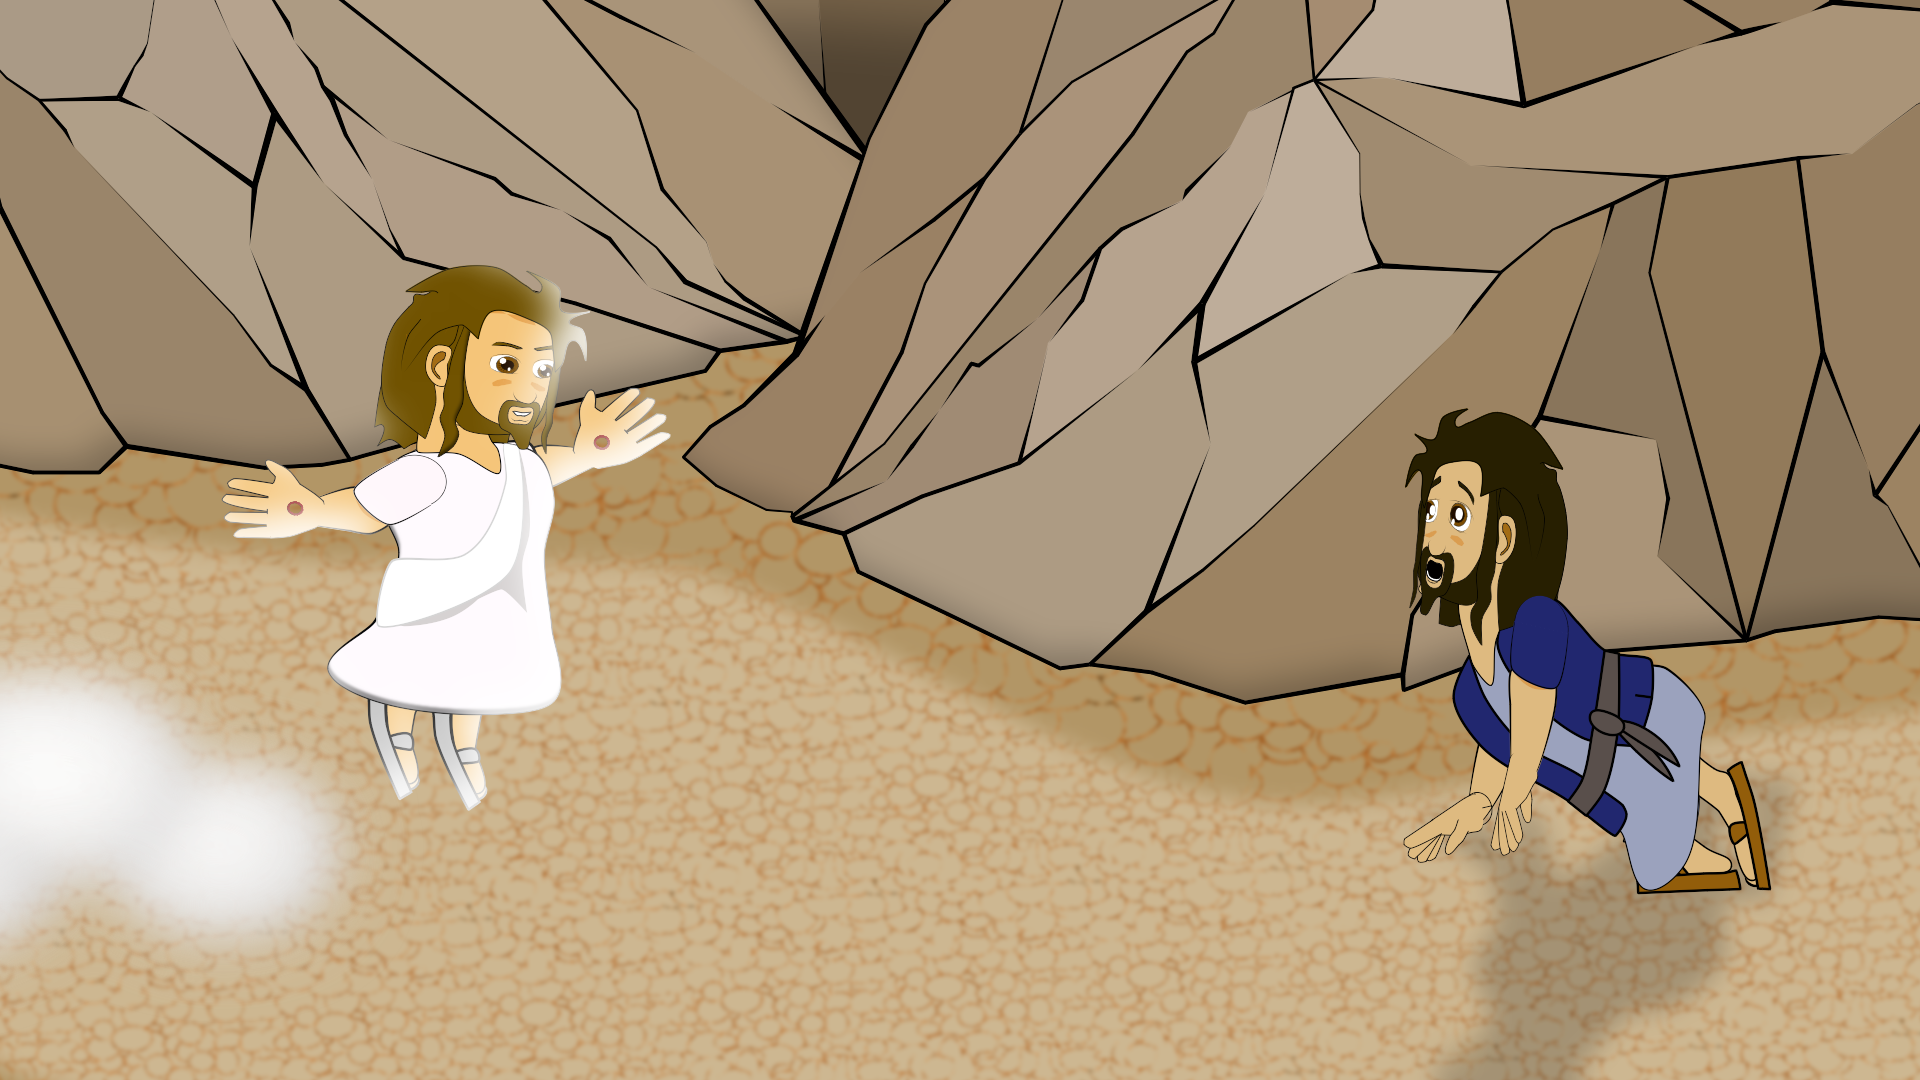 Bible Kids DVD Series Episode 1 The Resurrected Jesus Appears to Saul of Tarsus on the road to Damascus